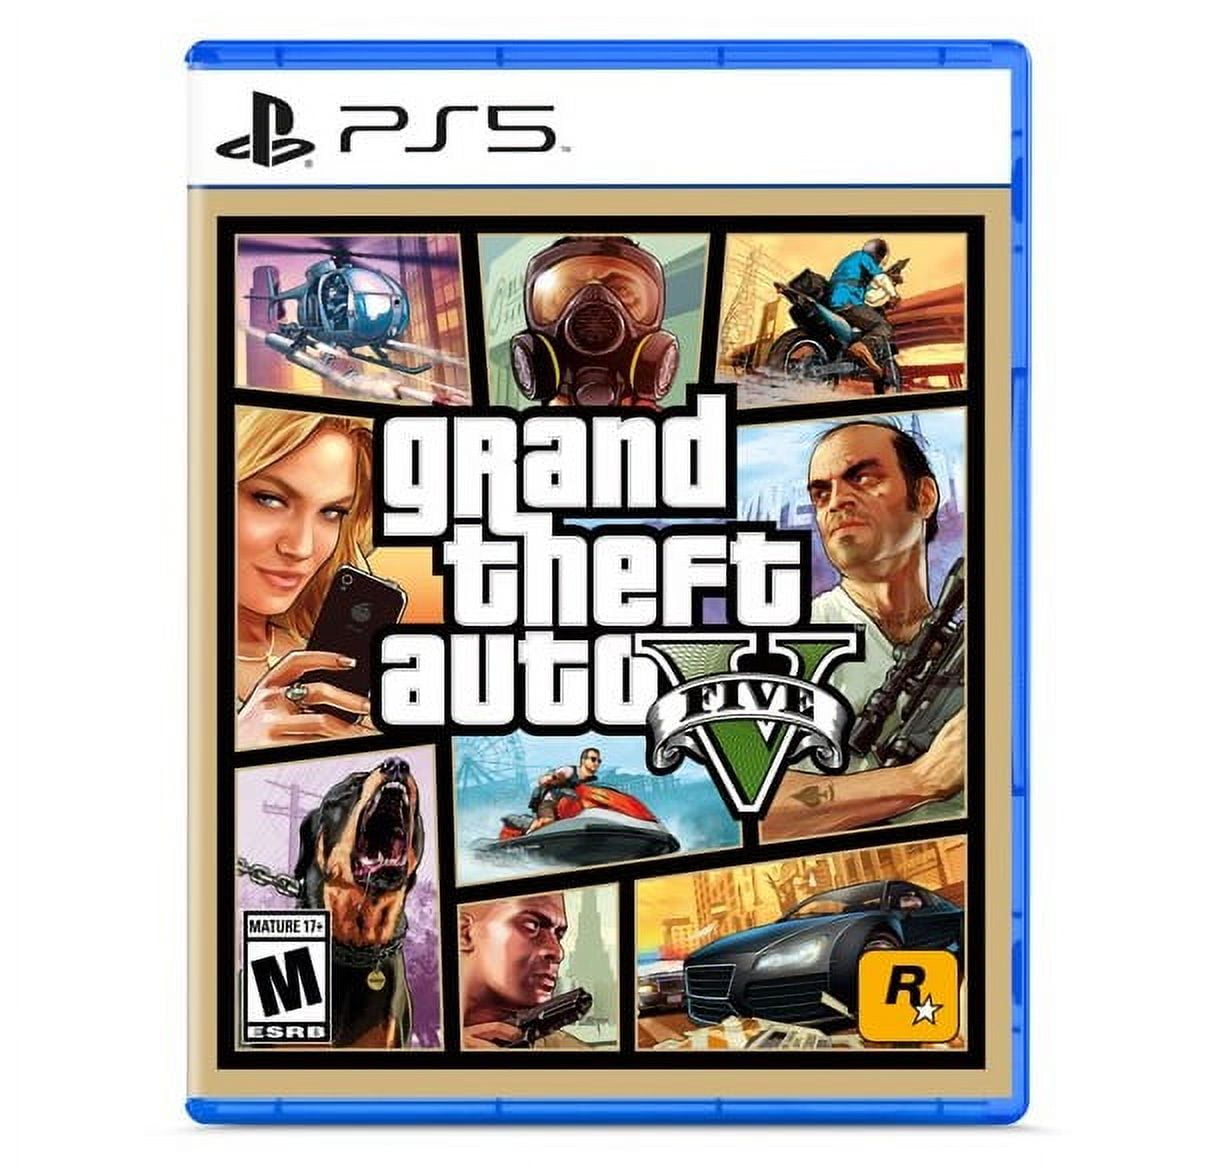 Grand Theft Auto 5 Now Only $23.73 for PlayStation 5